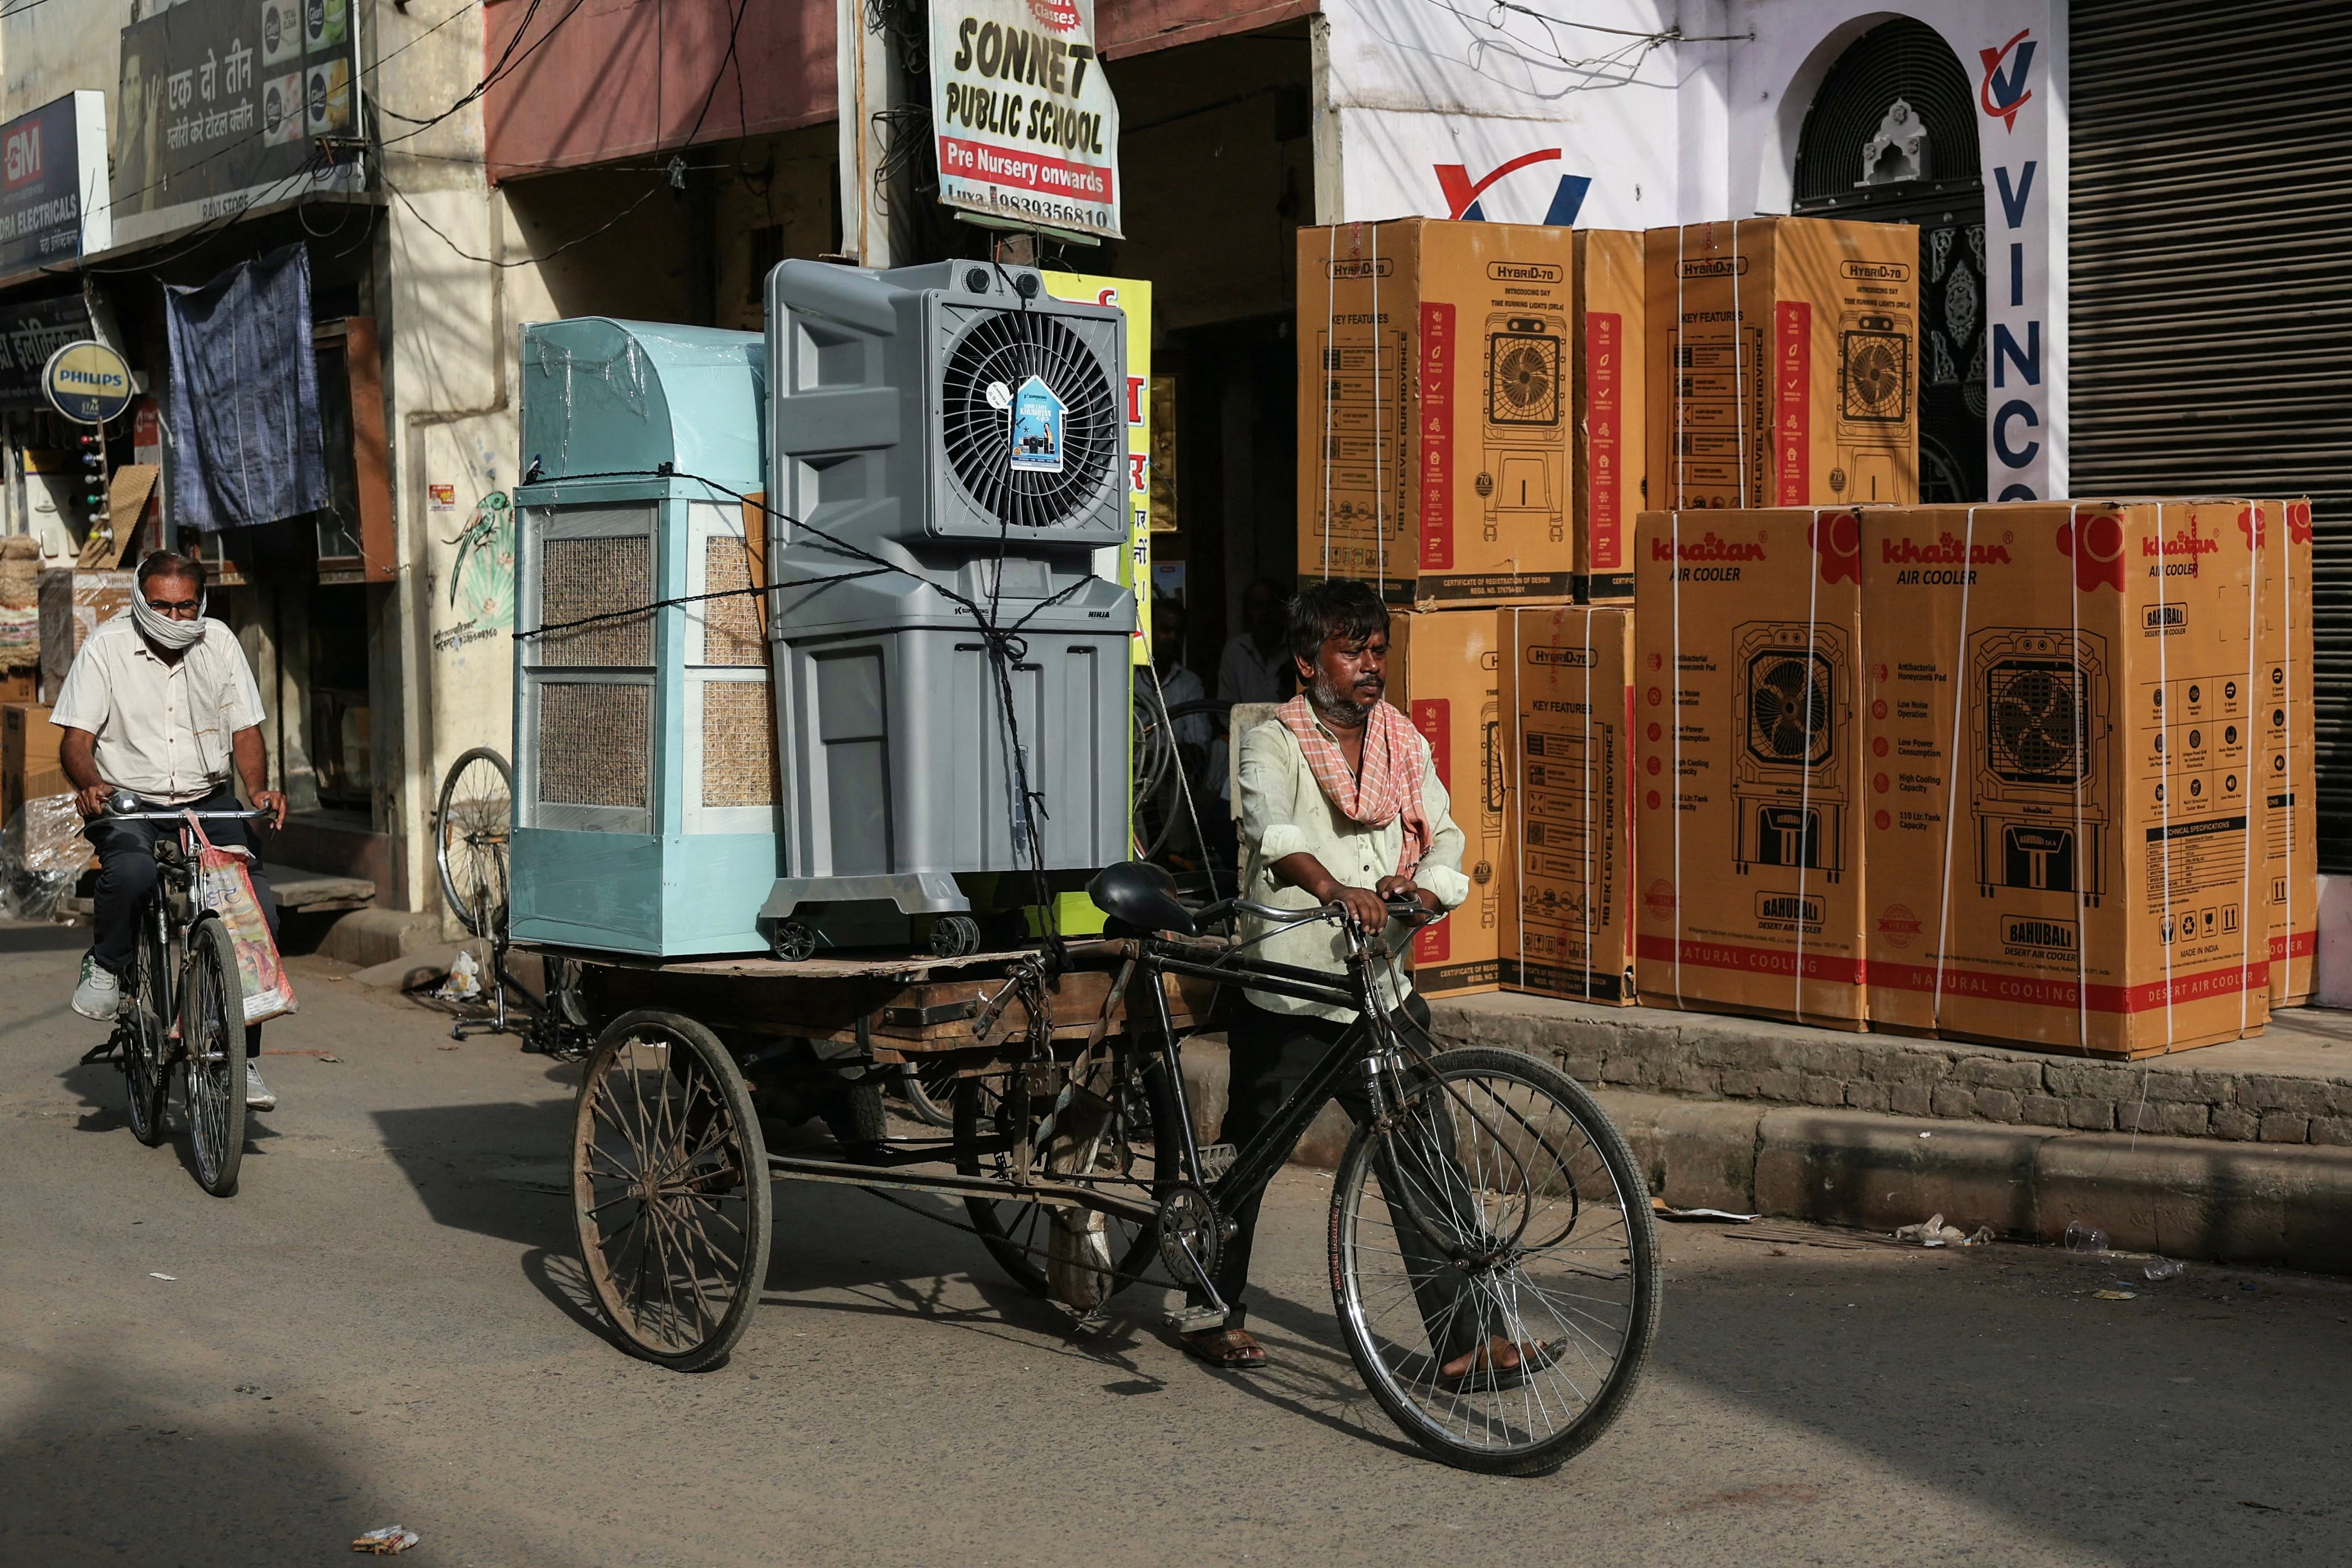 A man transports air coolers during a severe heatwave in the Indian city of Varanasi